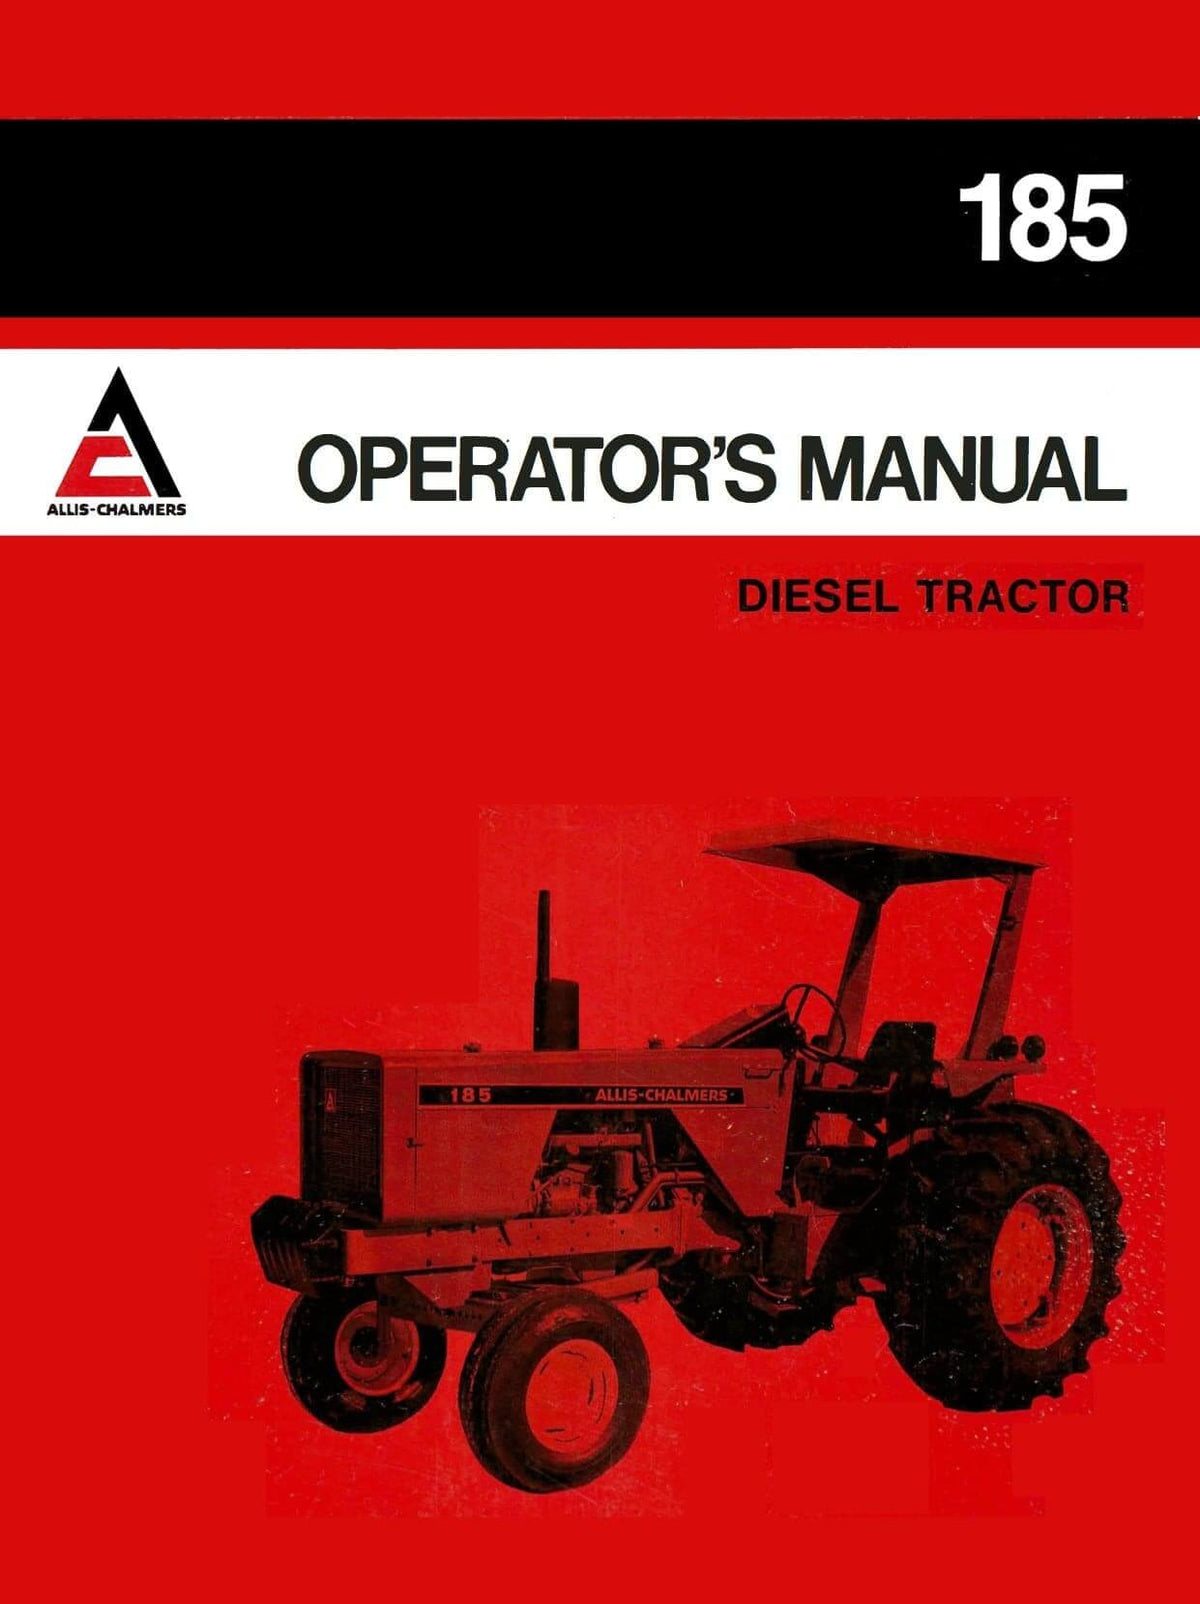 Allis-Chalmers 185 Diesel Tractor - Operator's Manual - Ag Manuals - A Provider of Digital Farm Manuals - 1